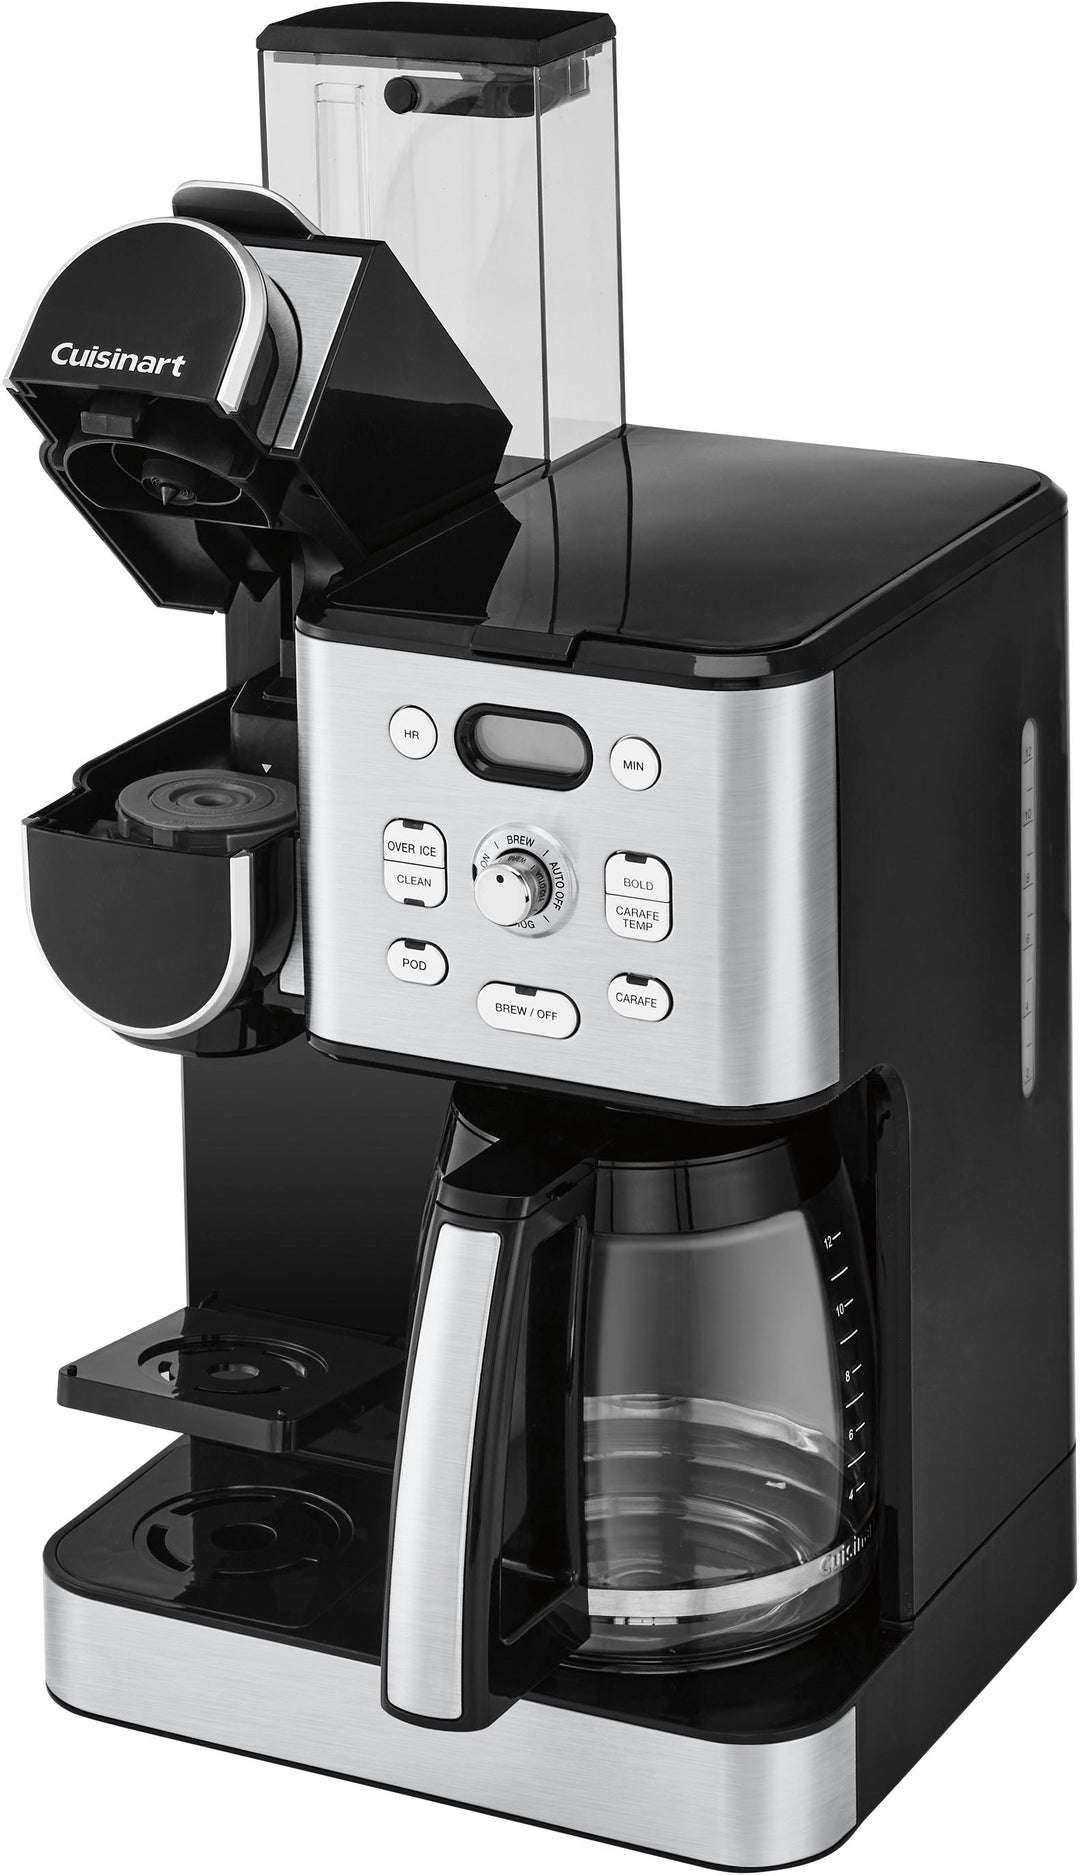 Cuisinart - 12 Cup 2-In-1 Coffee Center Coffeemaker - Black Stainless_2